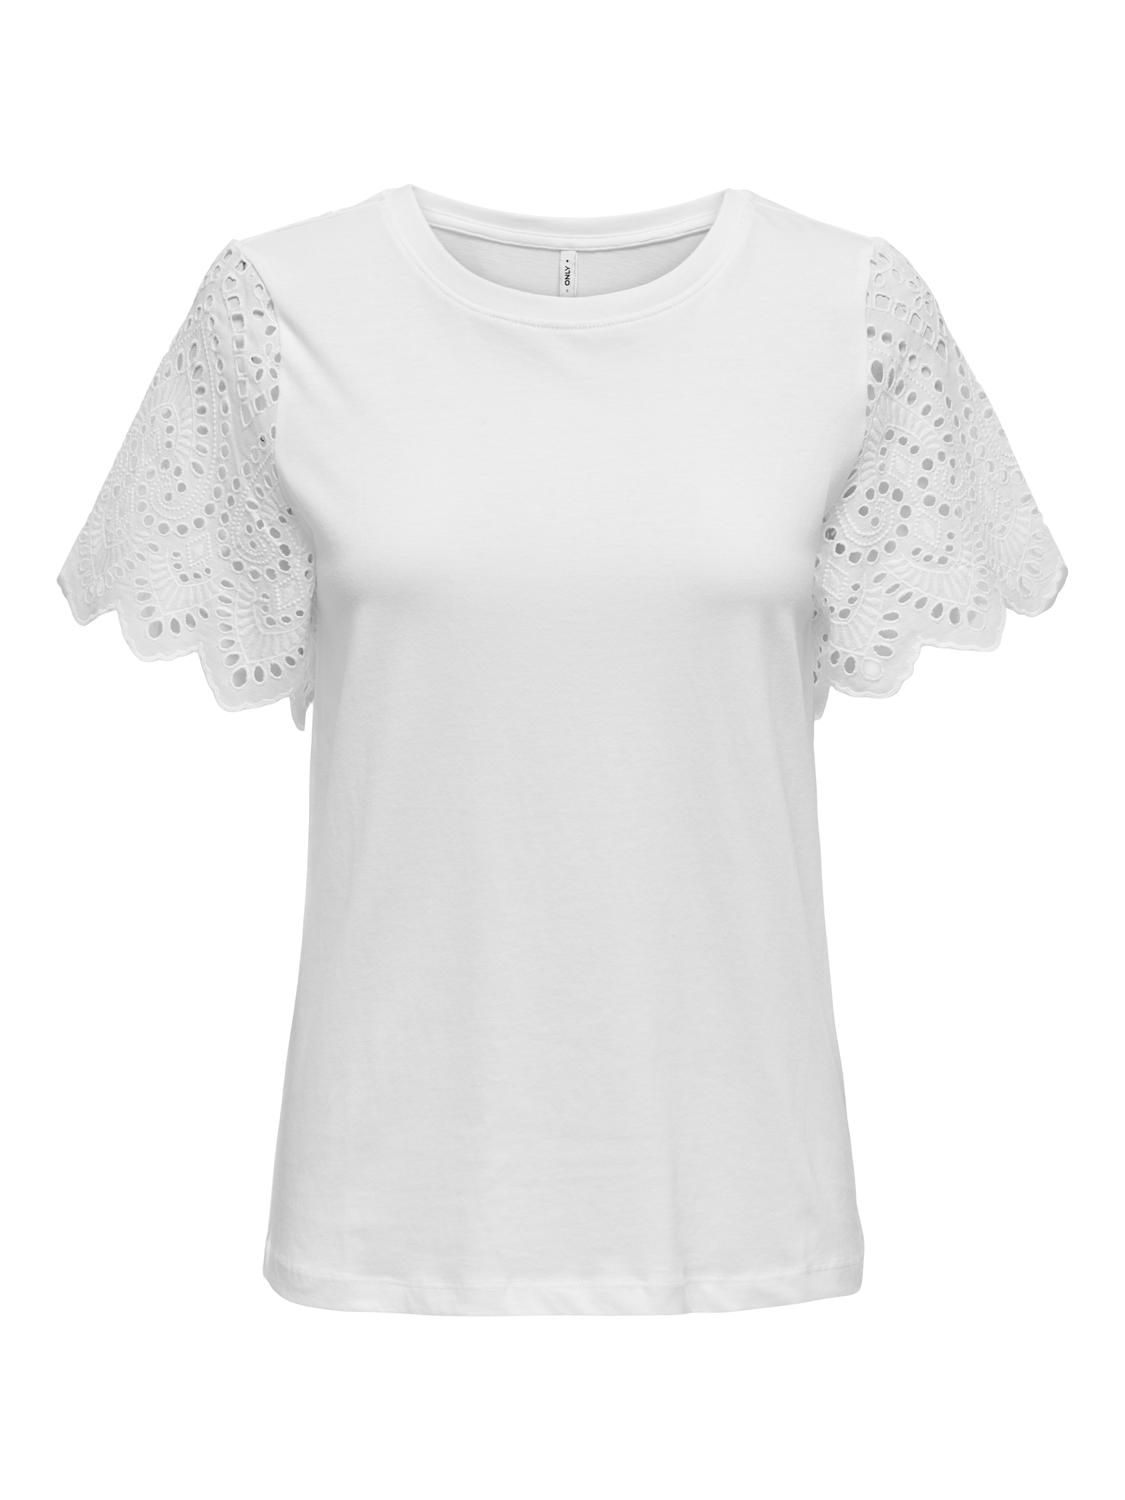 ONLEBBA LIFE S/S LACE TOP JRS